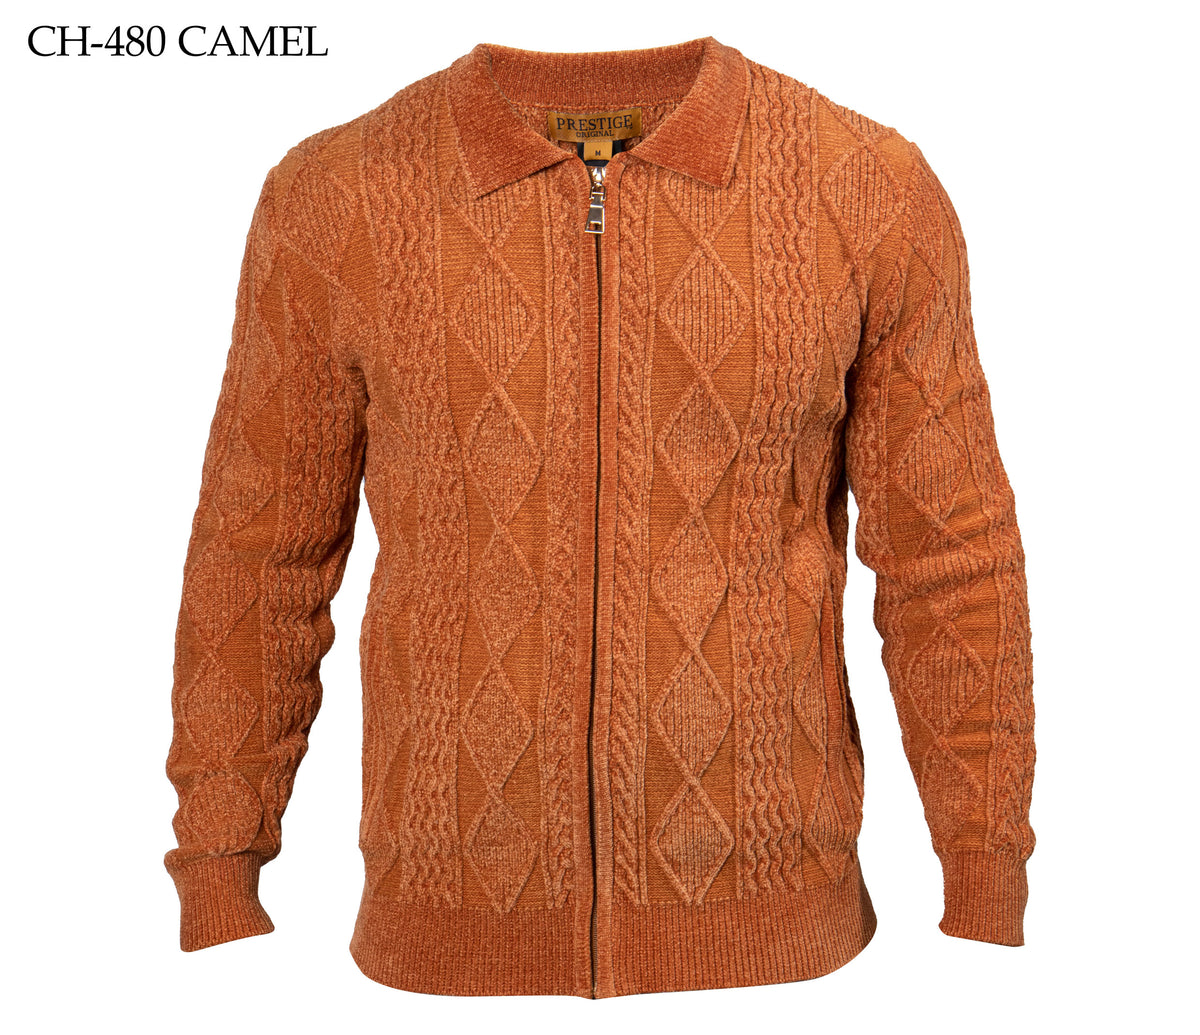 Prestige Camel Knitted Zip Up Sweater - Dudes Boutique